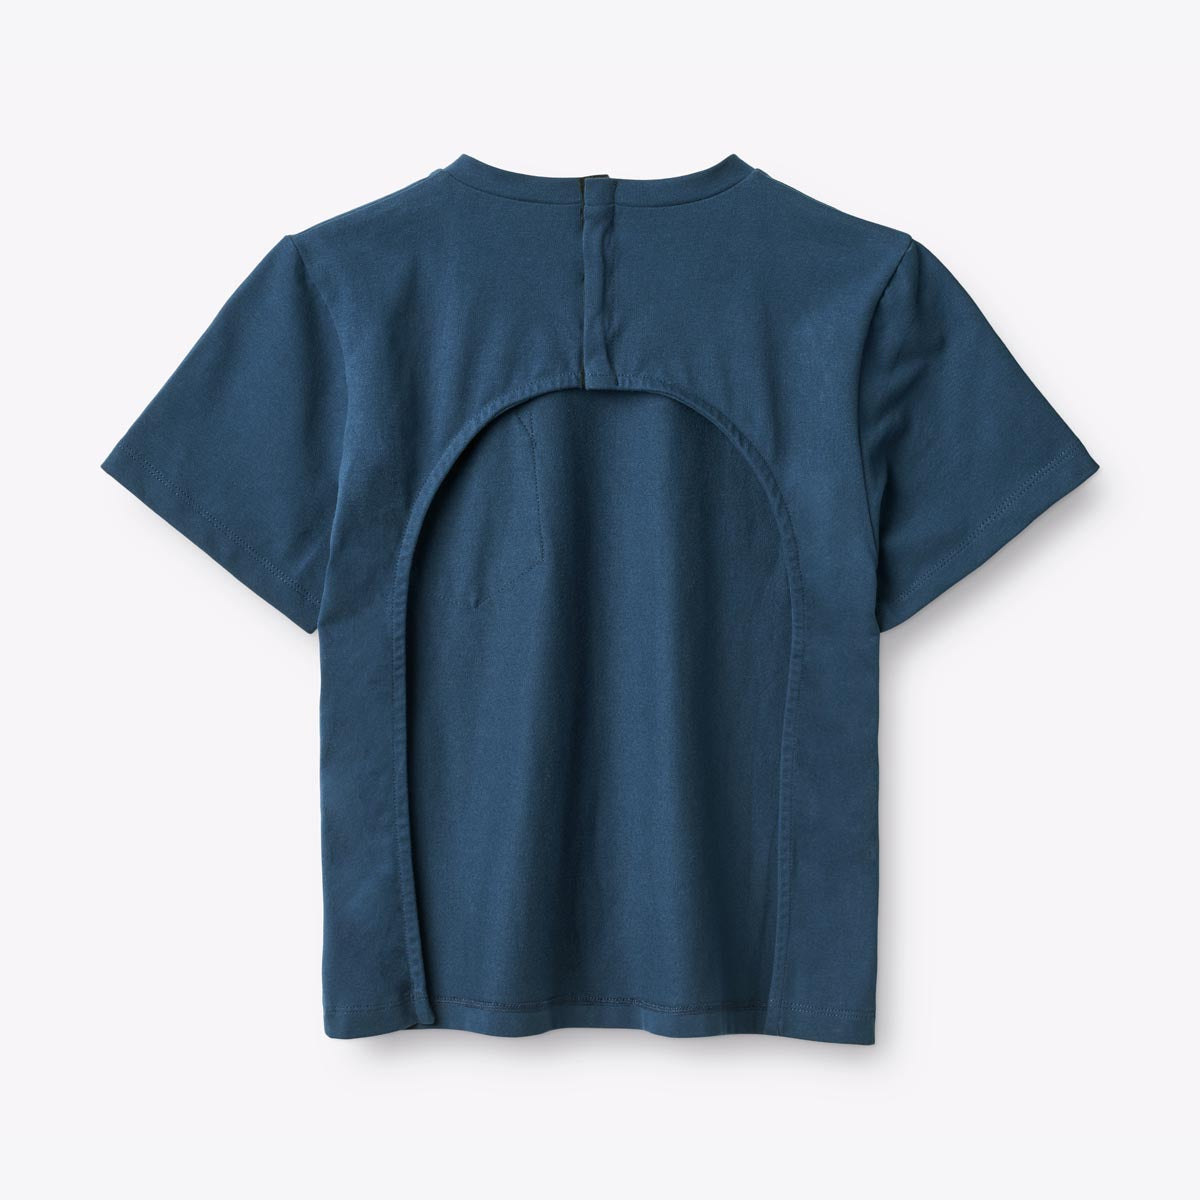 ABEL T-shirt for disabled children - Navy Blue (open back for wheelchair users)